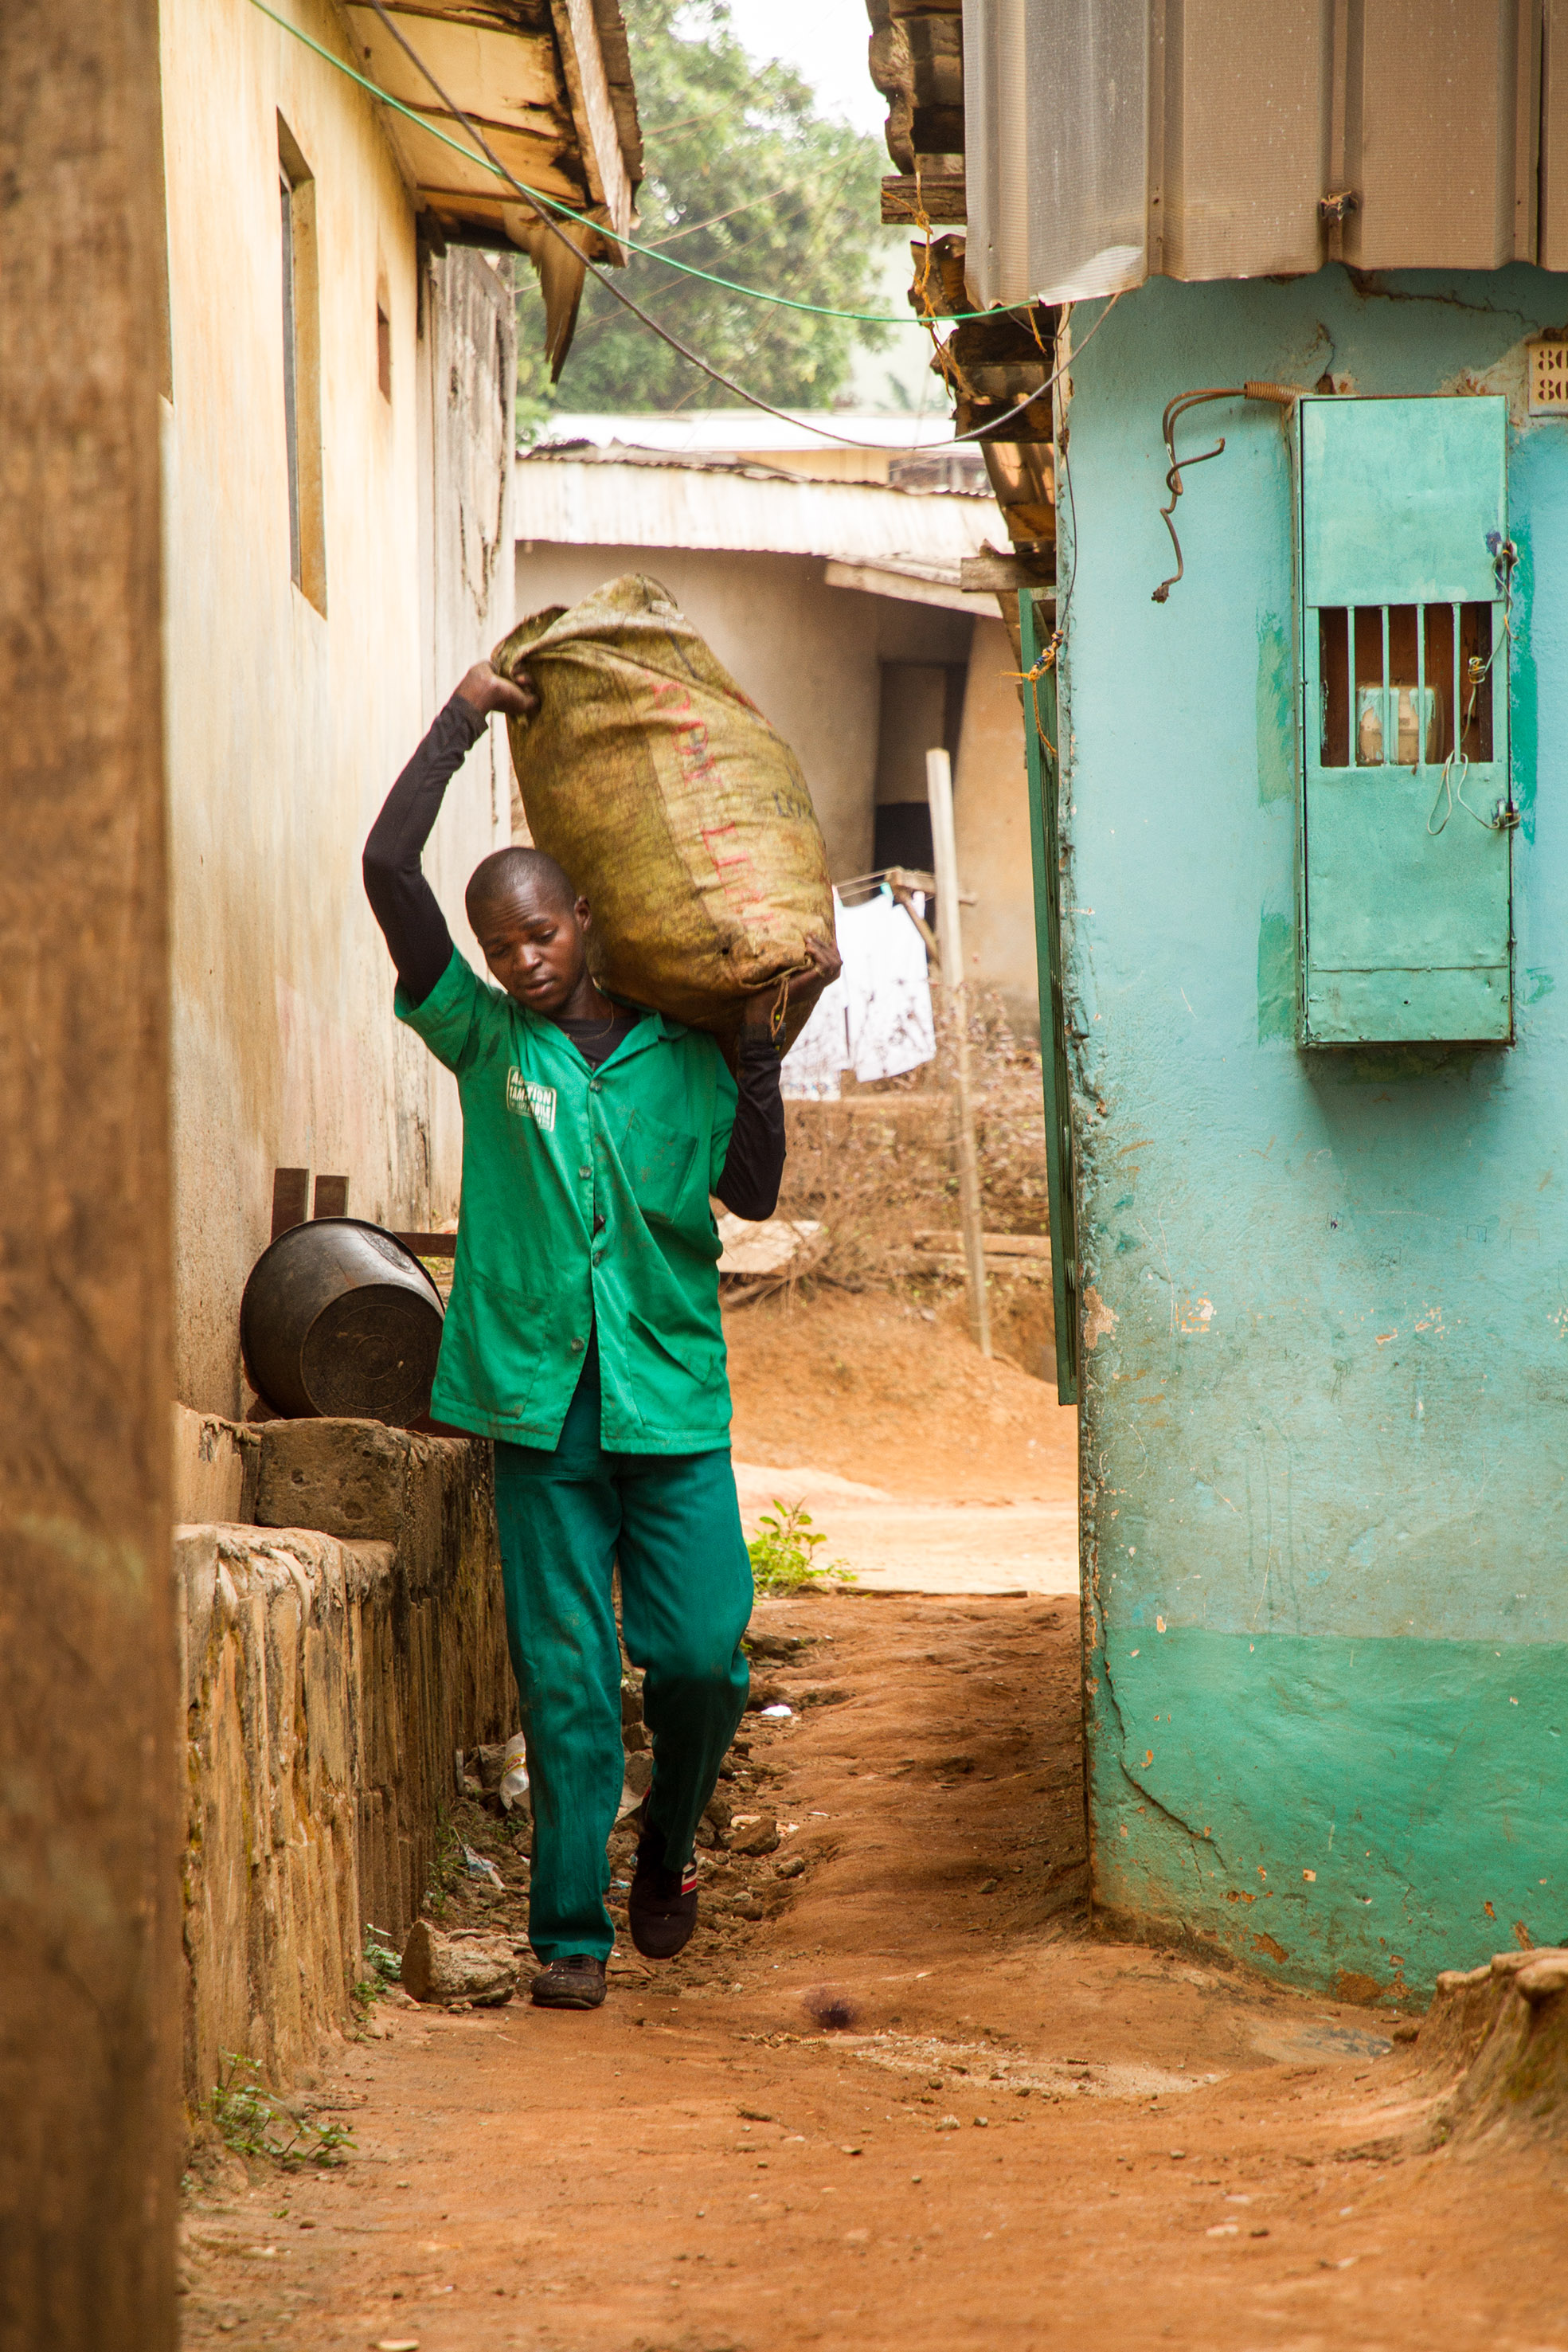 A Tam Tam mobile worker removes a bag of garbage from Melen, a slum area in the middle of Cameroon's capital Yaoundé.